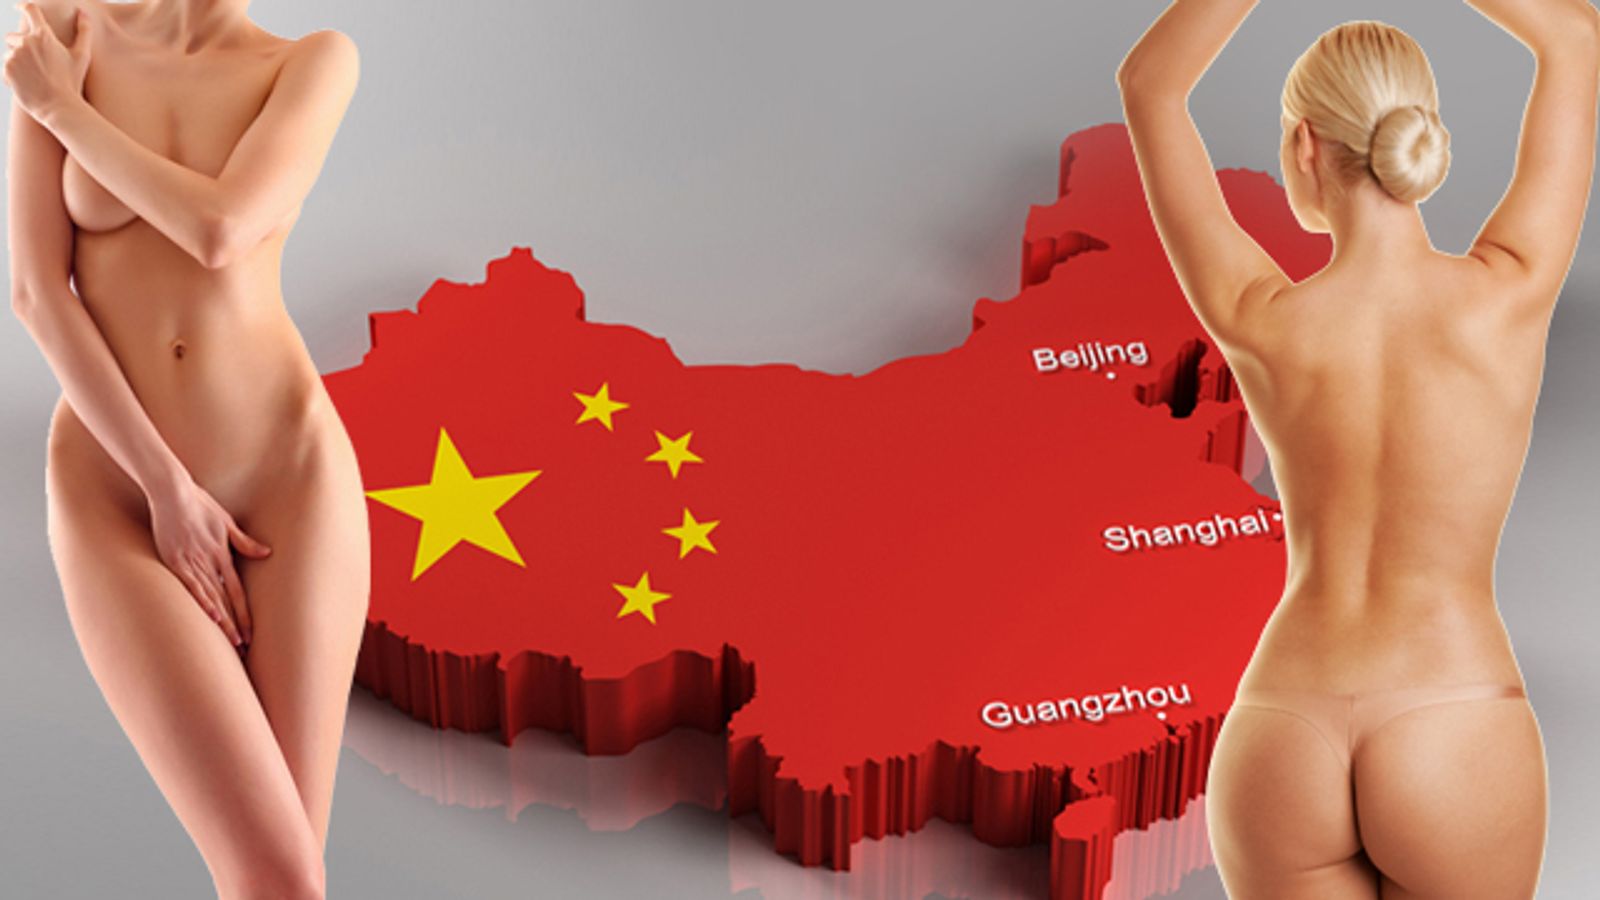 China Warms Up to Online Porn?